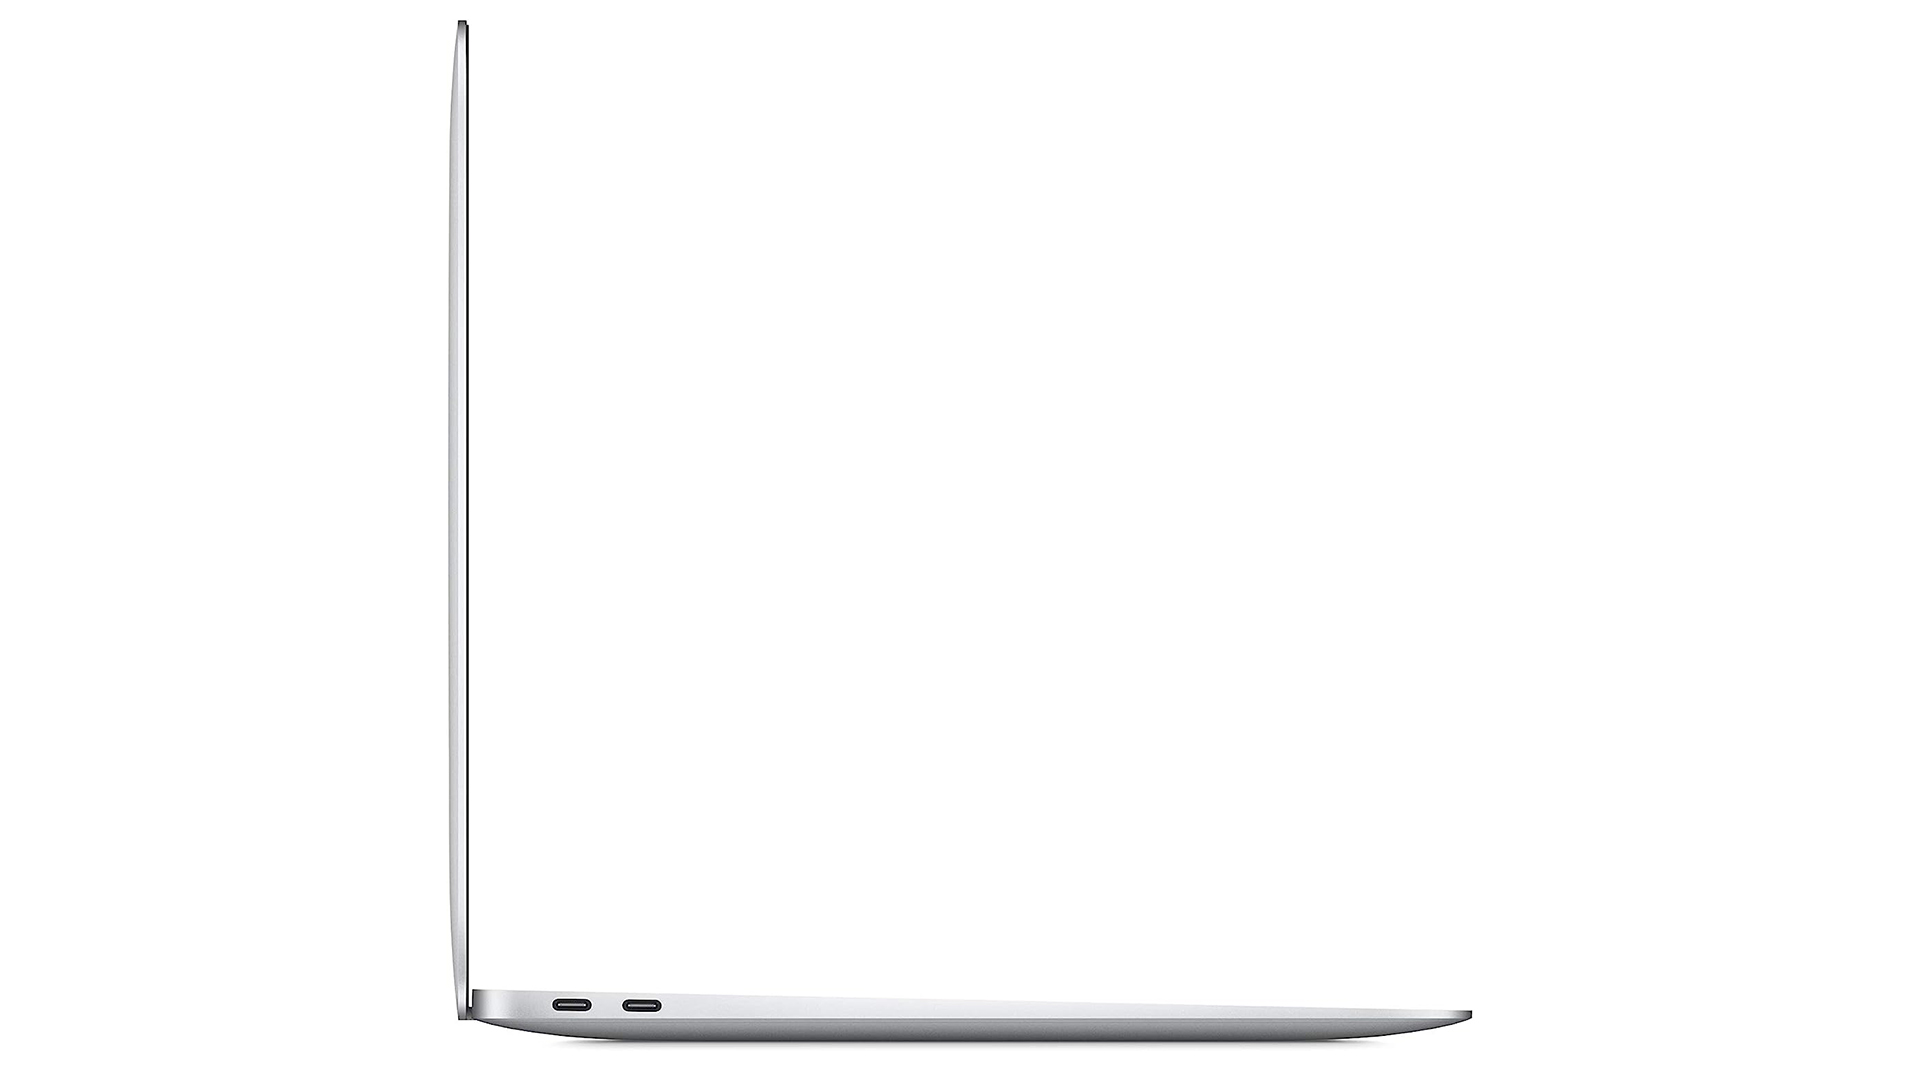 The side profile of the 2020 MacBook Air.